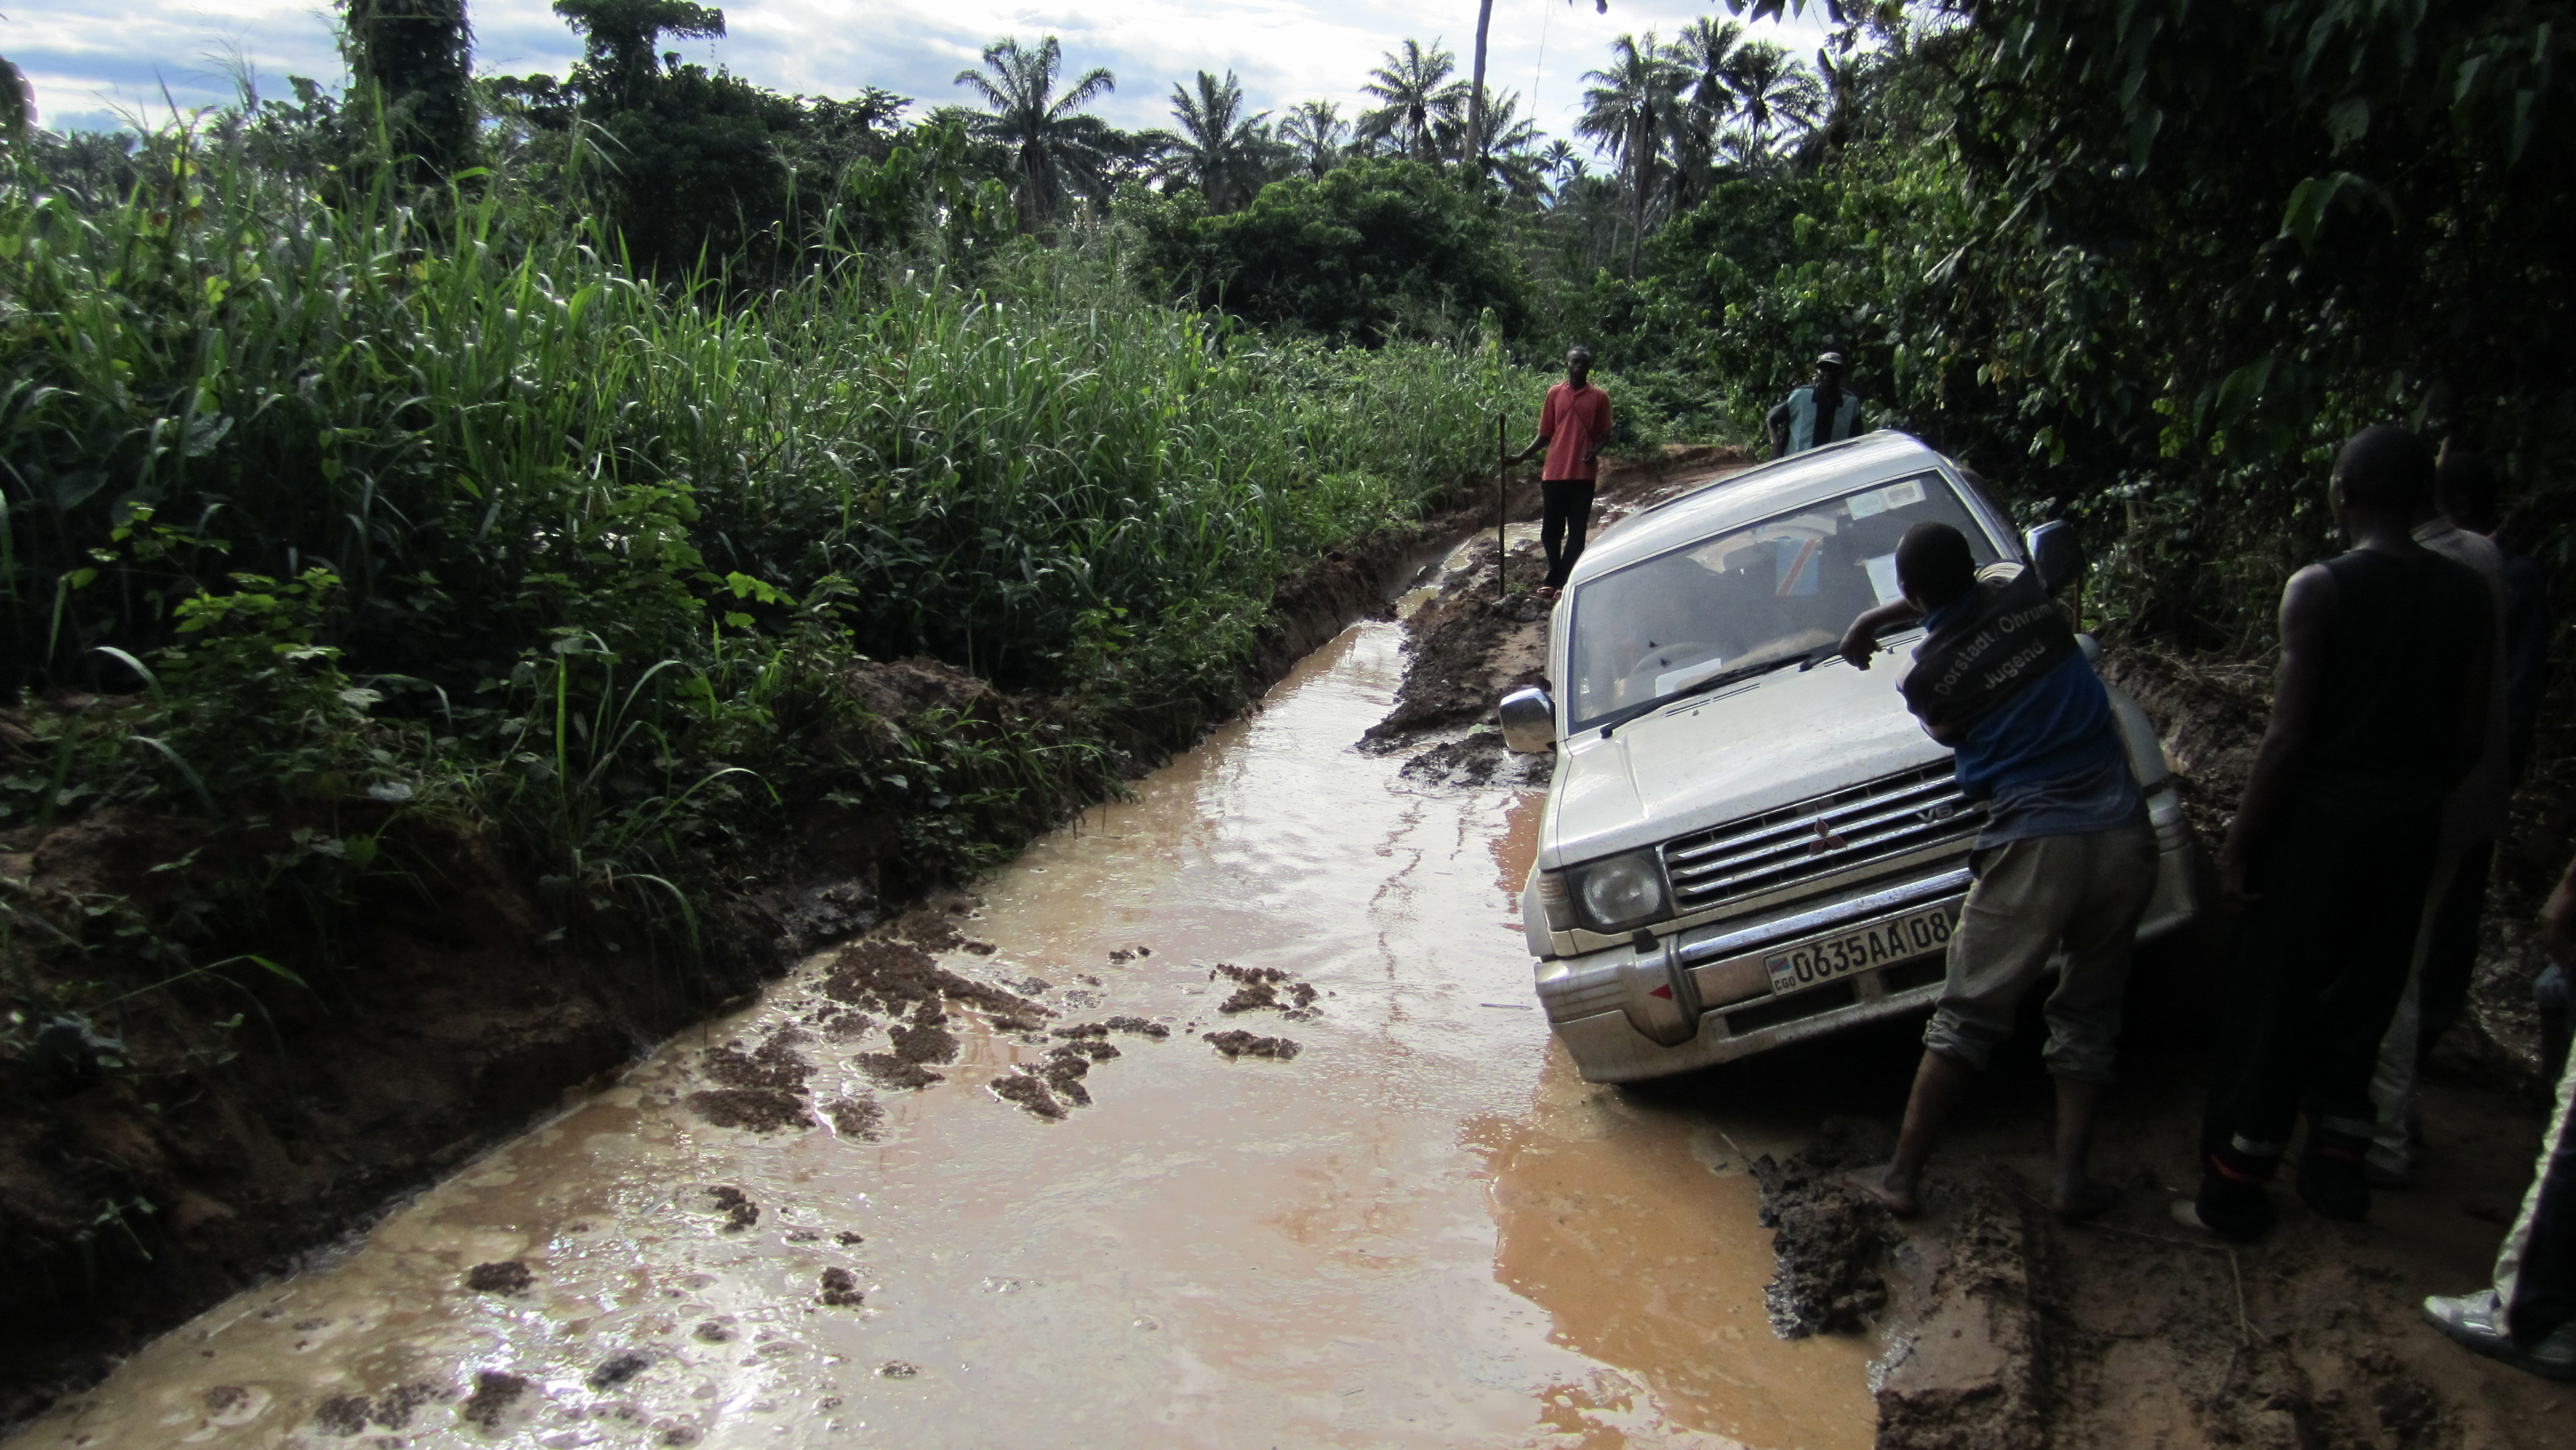 Challenging road conditions in Kasai Occidental